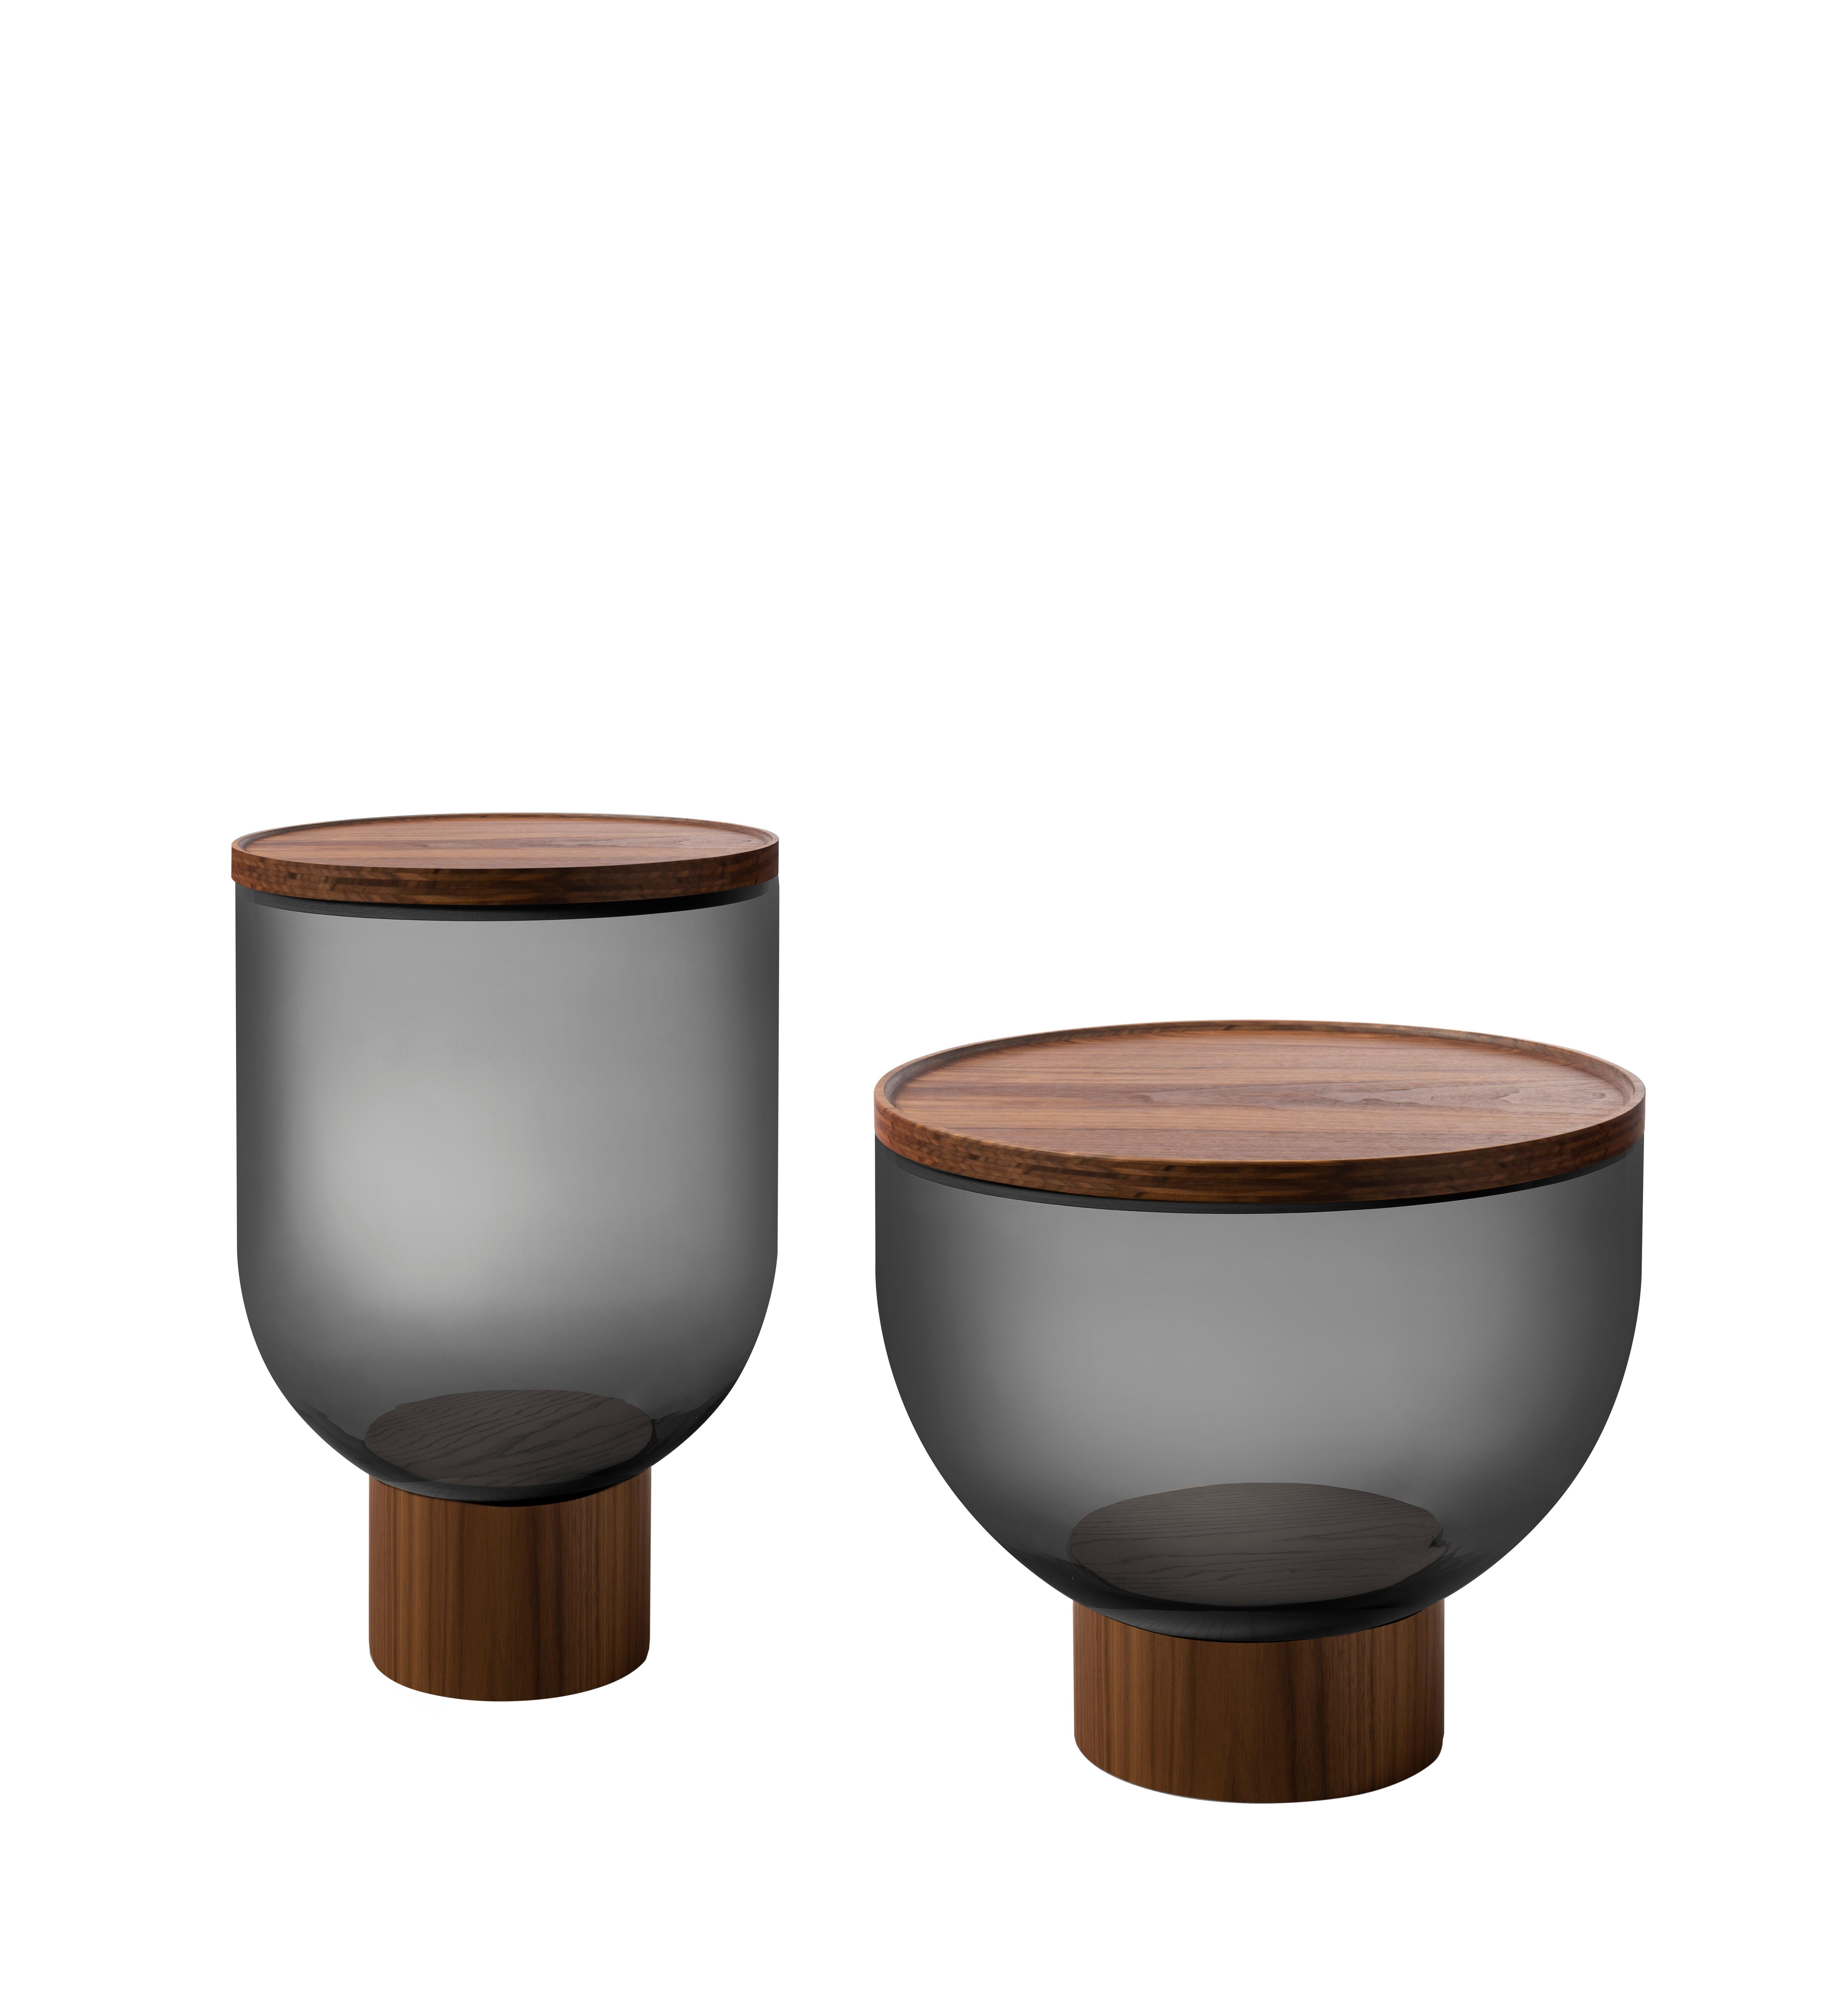 This high coffee and side-table comes with a base and top in Canaletto walnut, natural ash, ash stained black, intense blue or anthracite. The structure's body is made out of blown Murano glass, available in amber, blue-grey or smoke grey. Here you